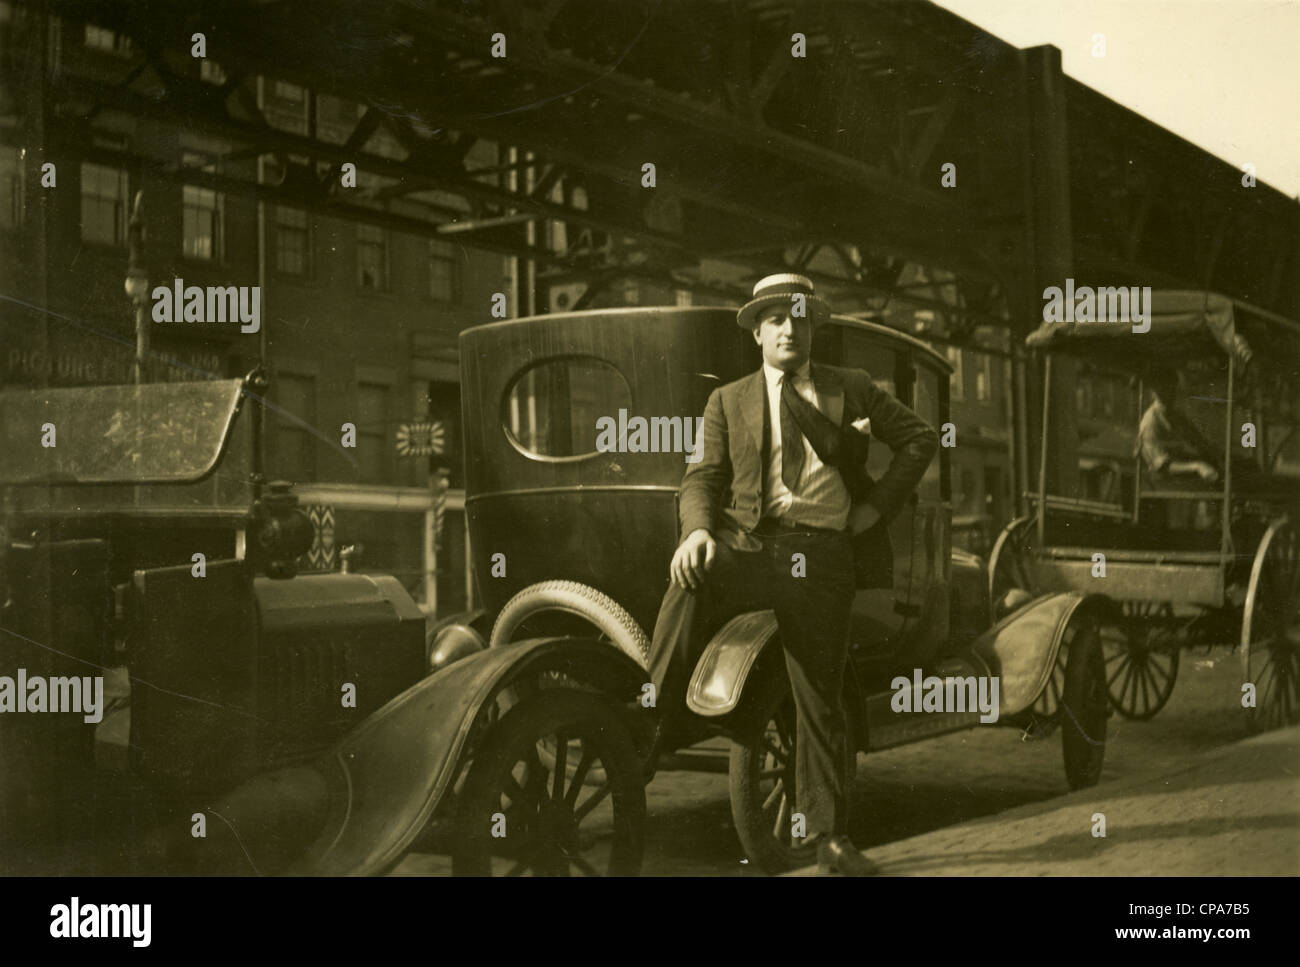 Circa 1920 photograph of a man with his car under the Washington Street Elevated segment of the Boston Elevated Railway. Stock Photo